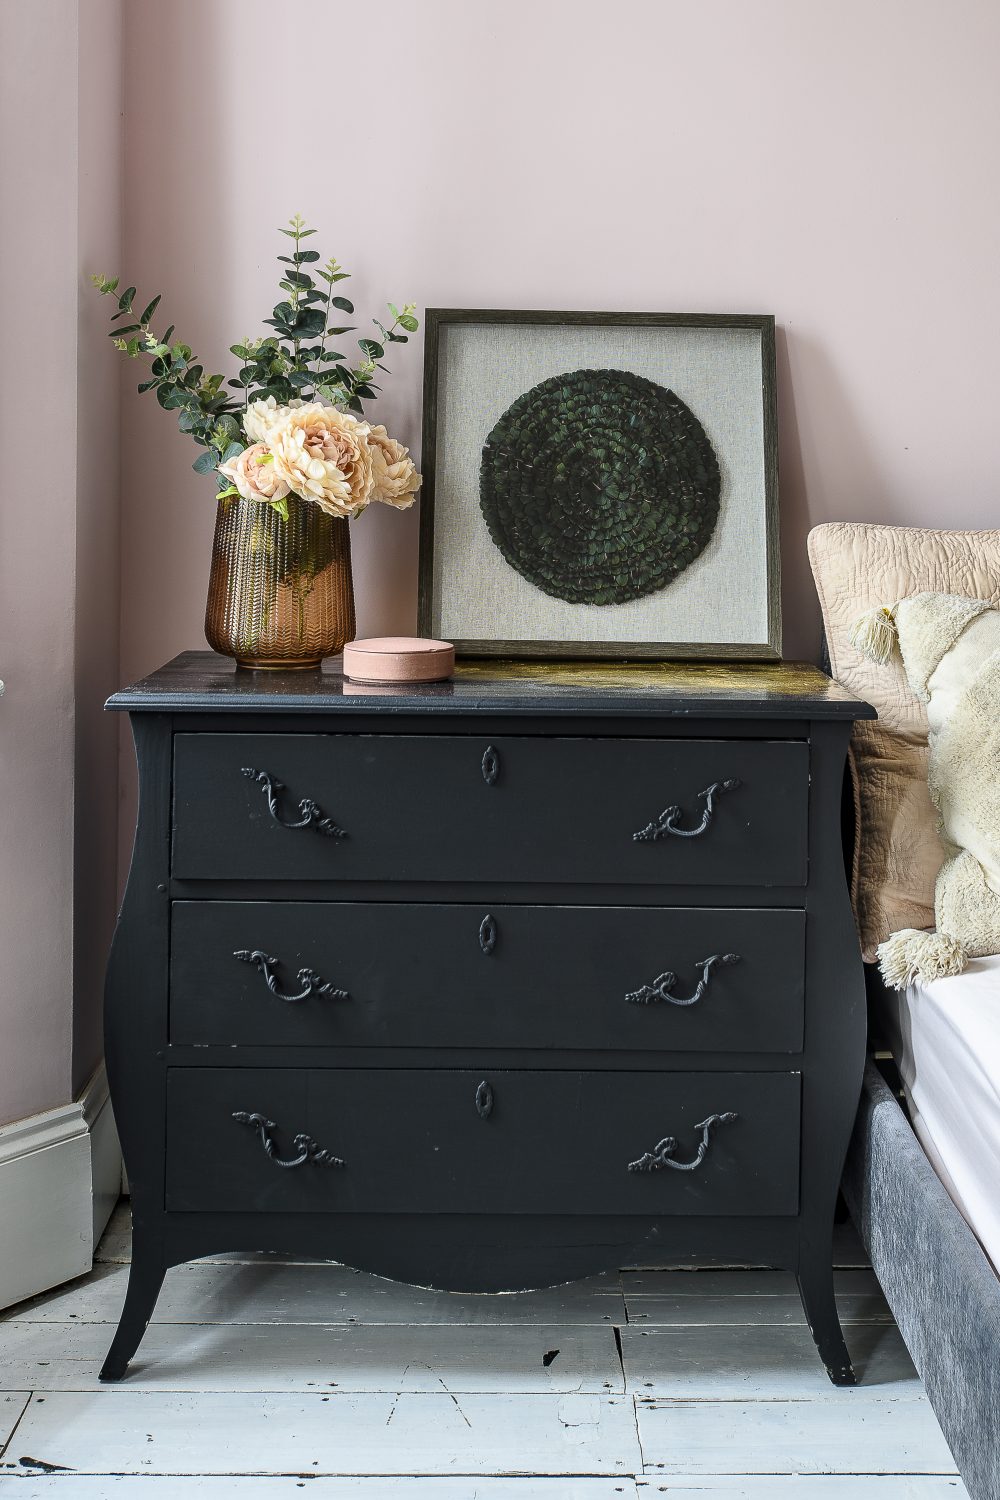 A guest bedroom has a distinct powder room feel with pale pink walls and iridescent feather artwork found in Homesense atop a black chest of drawers with a gold leaf top